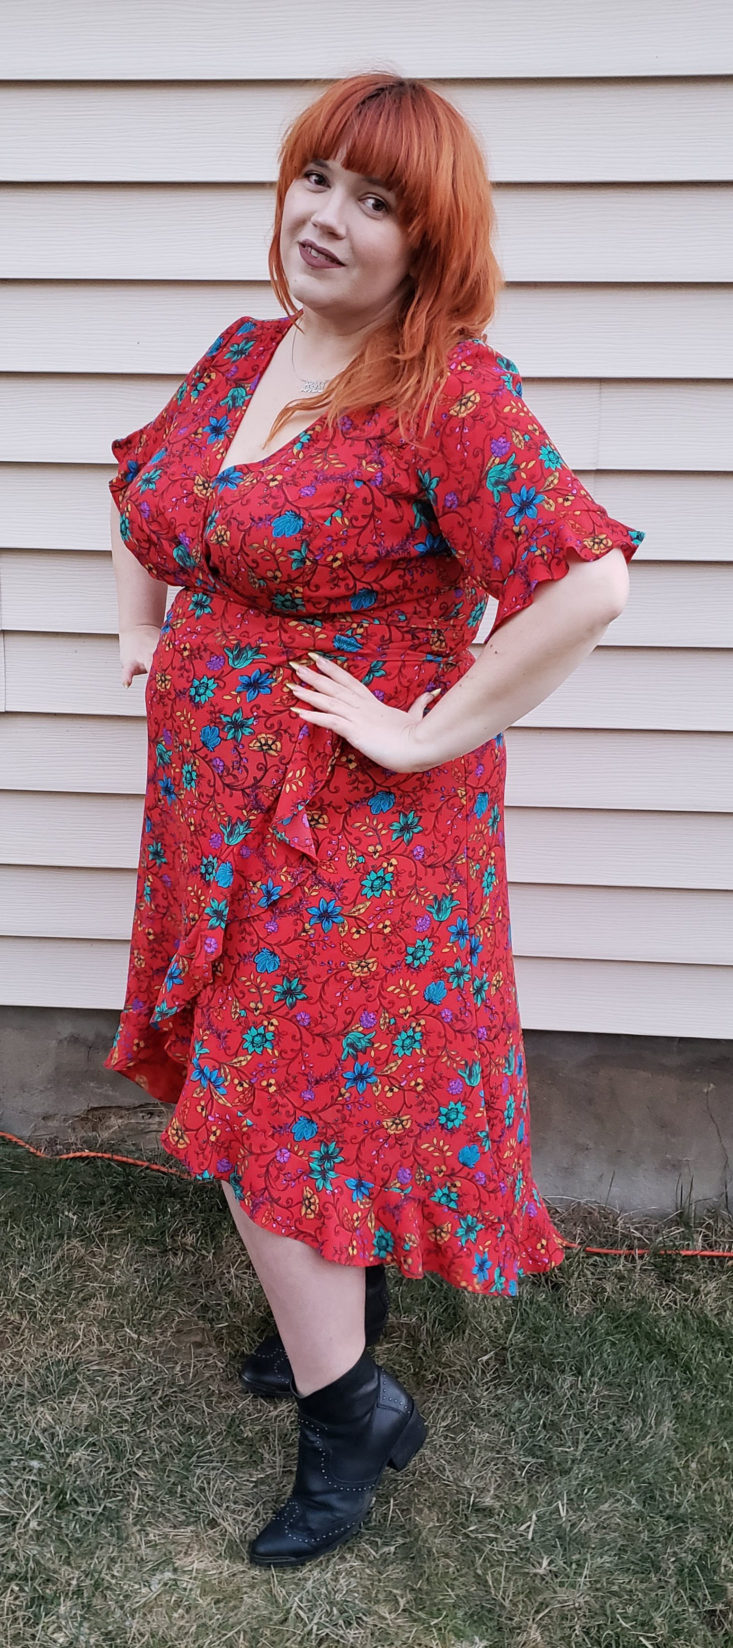 Gwynnie Bee Box Review November 2018 - Ruffle Sleeve Red True Floral Wrap Dress by London Times On Pose 3 Front